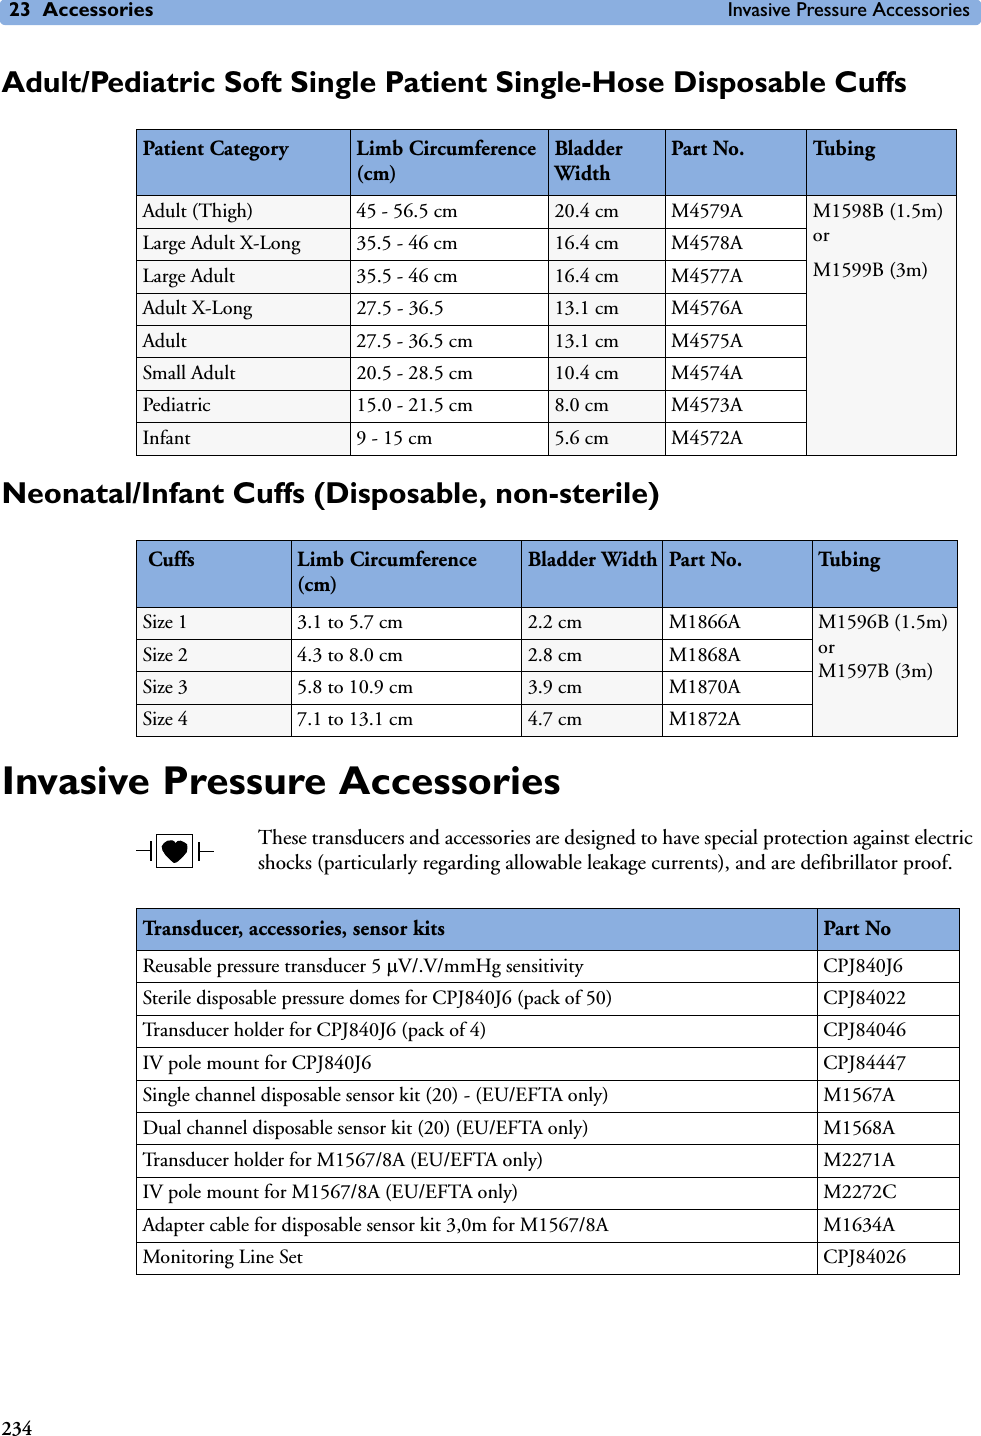 23 Accessories Invasive Pressure Accessories234Adult/Pediatric Soft Single Patient Single-Hose Disposable CuffsNeonatal/Infant Cuffs (Disposable, non-sterile)Invasive Pressure AccessoriesThese transducers and accessories are designed to have special protection against electric shocks (particularly regarding allowable leakage currents), and are defibrillator proof.Patient Category Limb Circumference (cm)Bladder WidthPart No.  Tu b i n gAdult (Thigh) 45 - 56.5 cm 20.4 cm M4579A M1598B (1.5m) or M1599B (3m)Large Adult X-Long 35.5 - 46 cm 16.4 cm M4578ALarge Adult 35.5 - 46 cm 16.4 cm M4577AAdult X-Long 27.5 - 36.5 13.1 cm M4576AAdult 27.5 - 36.5 cm 13.1 cm M4575ASmall Adult 20.5 - 28.5 cm 10.4 cm M4574APediatric 15.0 - 21.5 cm 8.0 cm M4573AInfant 9 - 15 cm 5.6 cm M4572A Cuffs Limb Circumference (cm)Bladder Width Part No.  Tu b i n gSize 1 3.1 to 5.7 cm 2.2 cm M1866A M1596B (1.5m) or M1597B (3m)Size 2 4.3 to 8.0 cm 2.8 cm M1868ASize 3 5.8 to 10.9 cm 3.9 cm M1870ASize 4 7.1 to 13.1 cm 4.7 cm M1872ATransducer, accessories, sensor kits Part NoReusable pressure transducer 5 PV/.V/mmHg sensitivity CPJ840J6Sterile disposable pressure domes for CPJ840J6 (pack of 50) CPJ84022Transducer holder for CPJ840J6 (pack of 4) CPJ84046IV pole mount for CPJ840J6 CPJ84447Single channel disposable sensor kit (20) - (EU/EFTA only) M1567ADual channel disposable sensor kit (20) (EU/EFTA only) M1568ATransducer holder for M1567/8A (EU/EFTA only) M2271AIV pole mount for M1567/8A (EU/EFTA only) M2272CAdapter cable for disposable sensor kit 3,0m for M1567/8A M1634AMonitoring Line Set CPJ84026